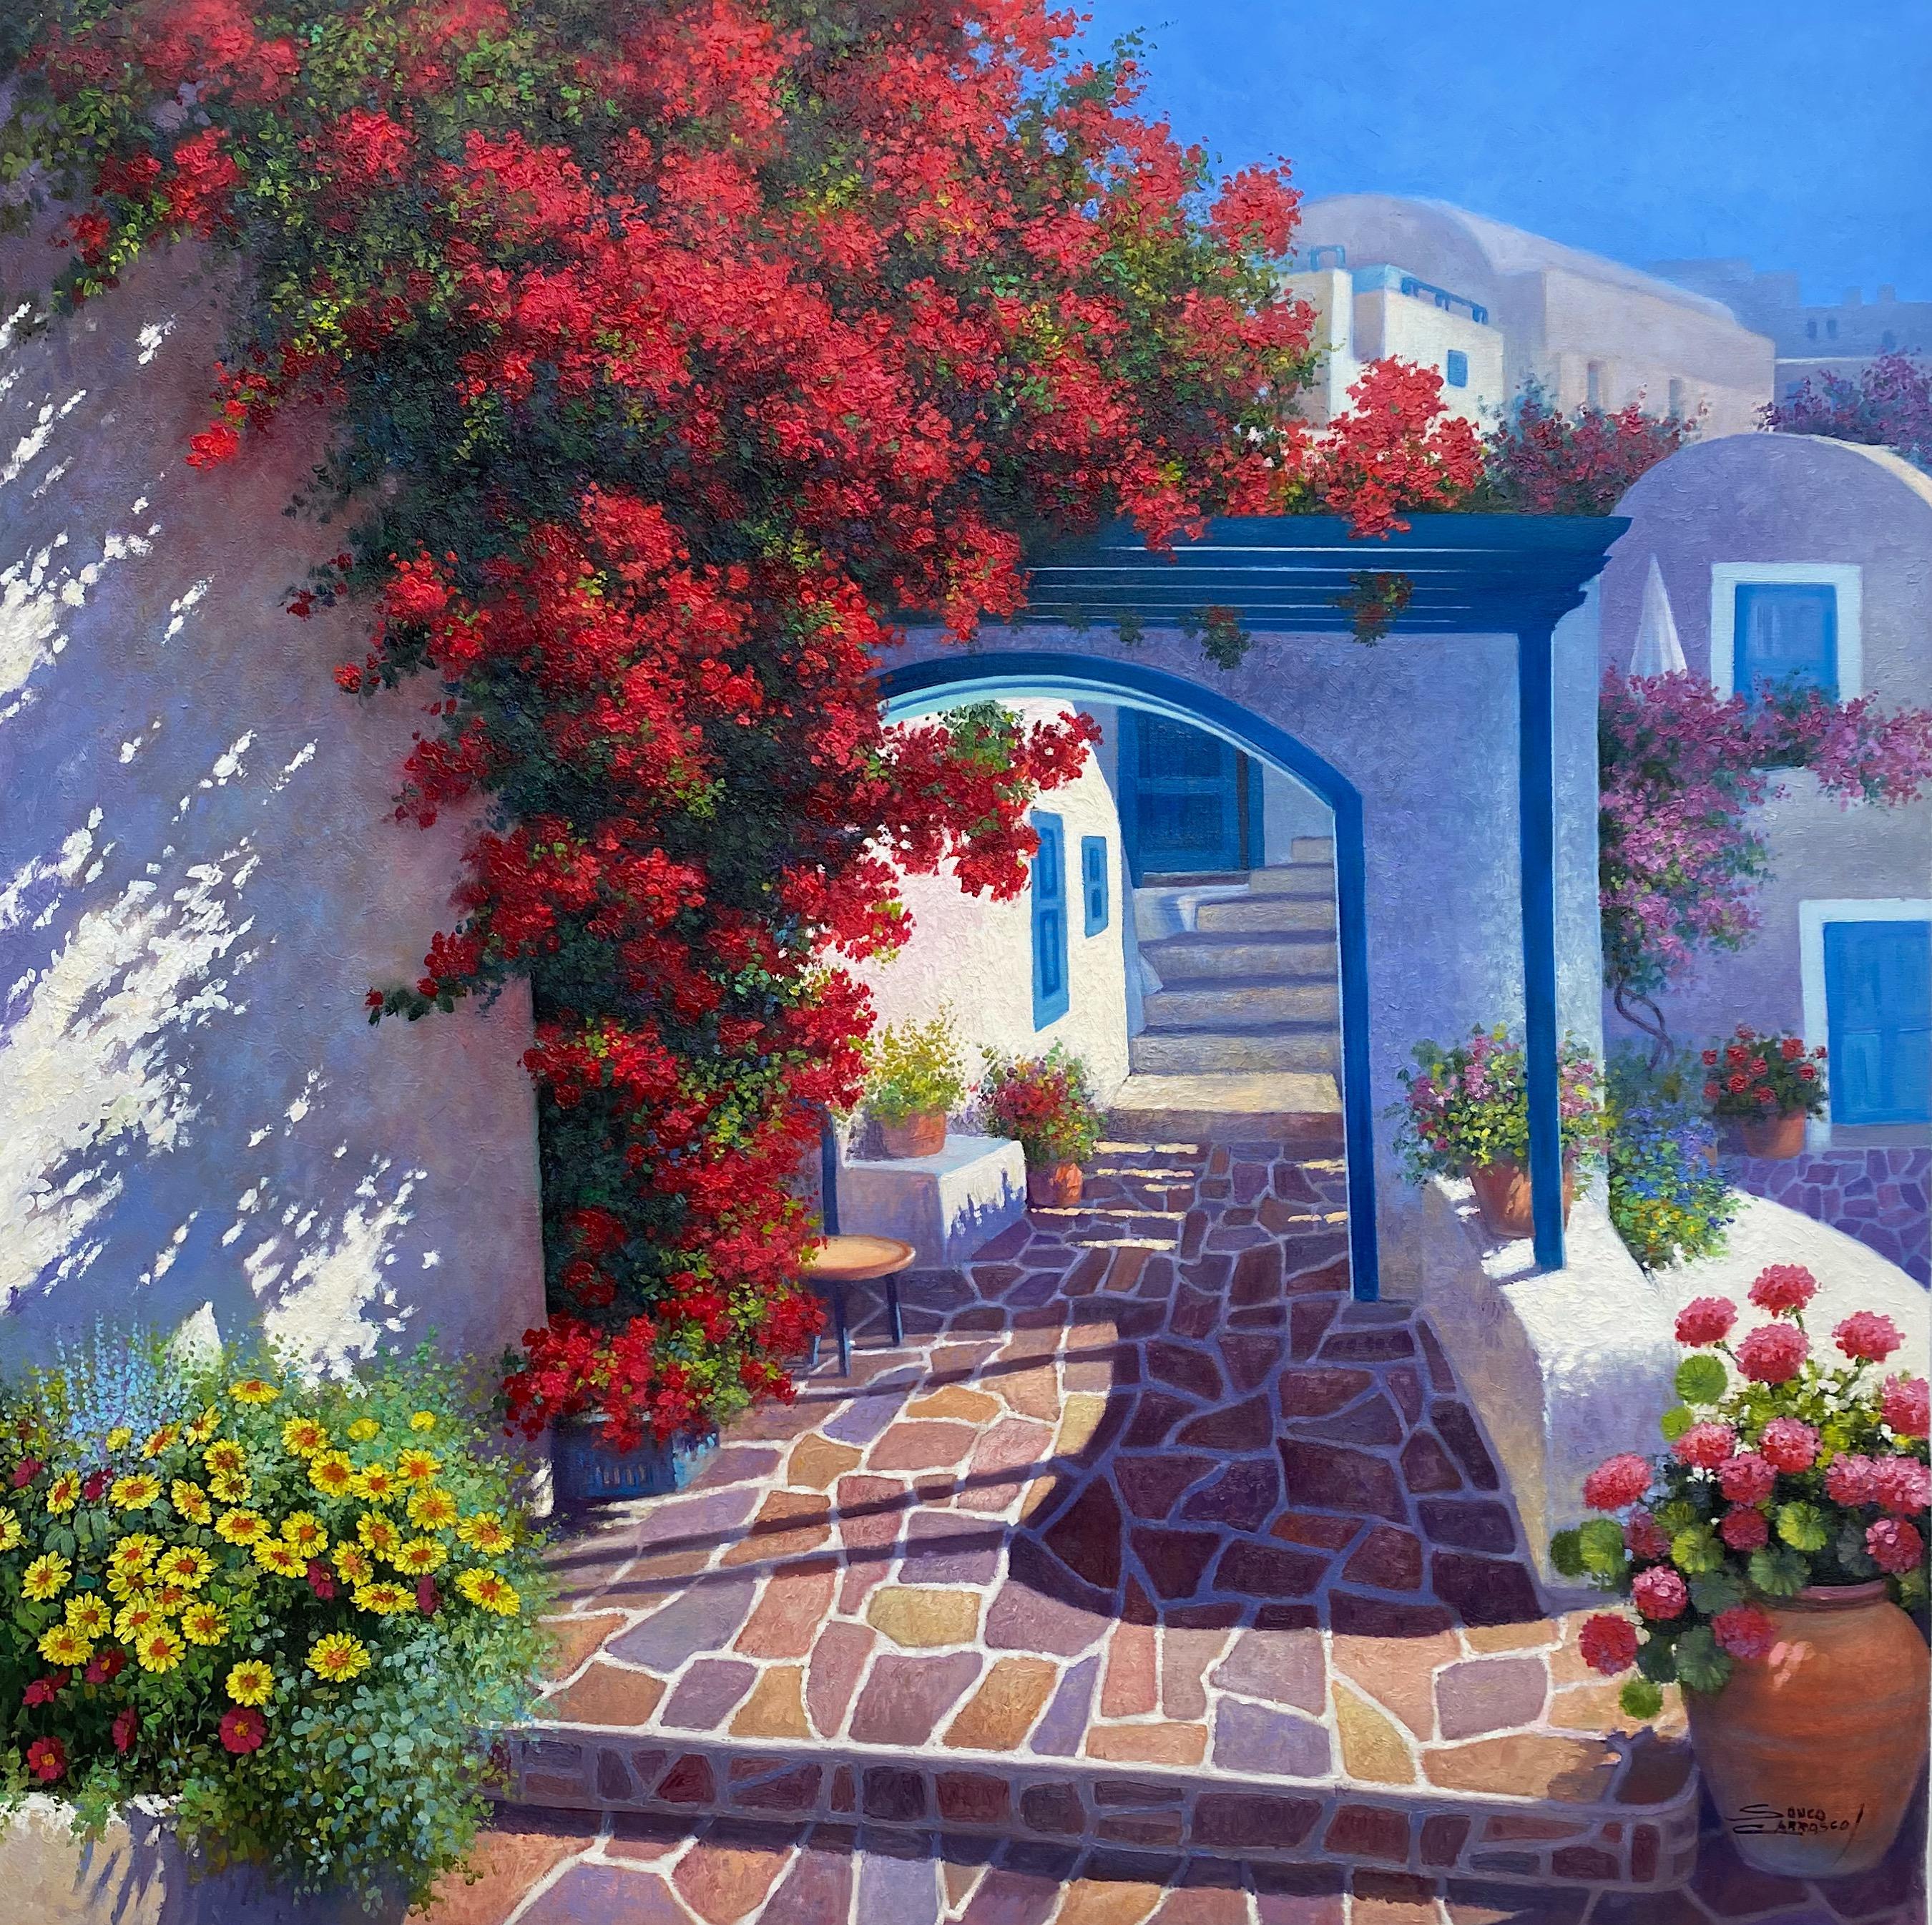 Sonco Carrasco Landscape Painting - Sunny day in Greece with bougainvilleas - Original oil painting - Impressionist